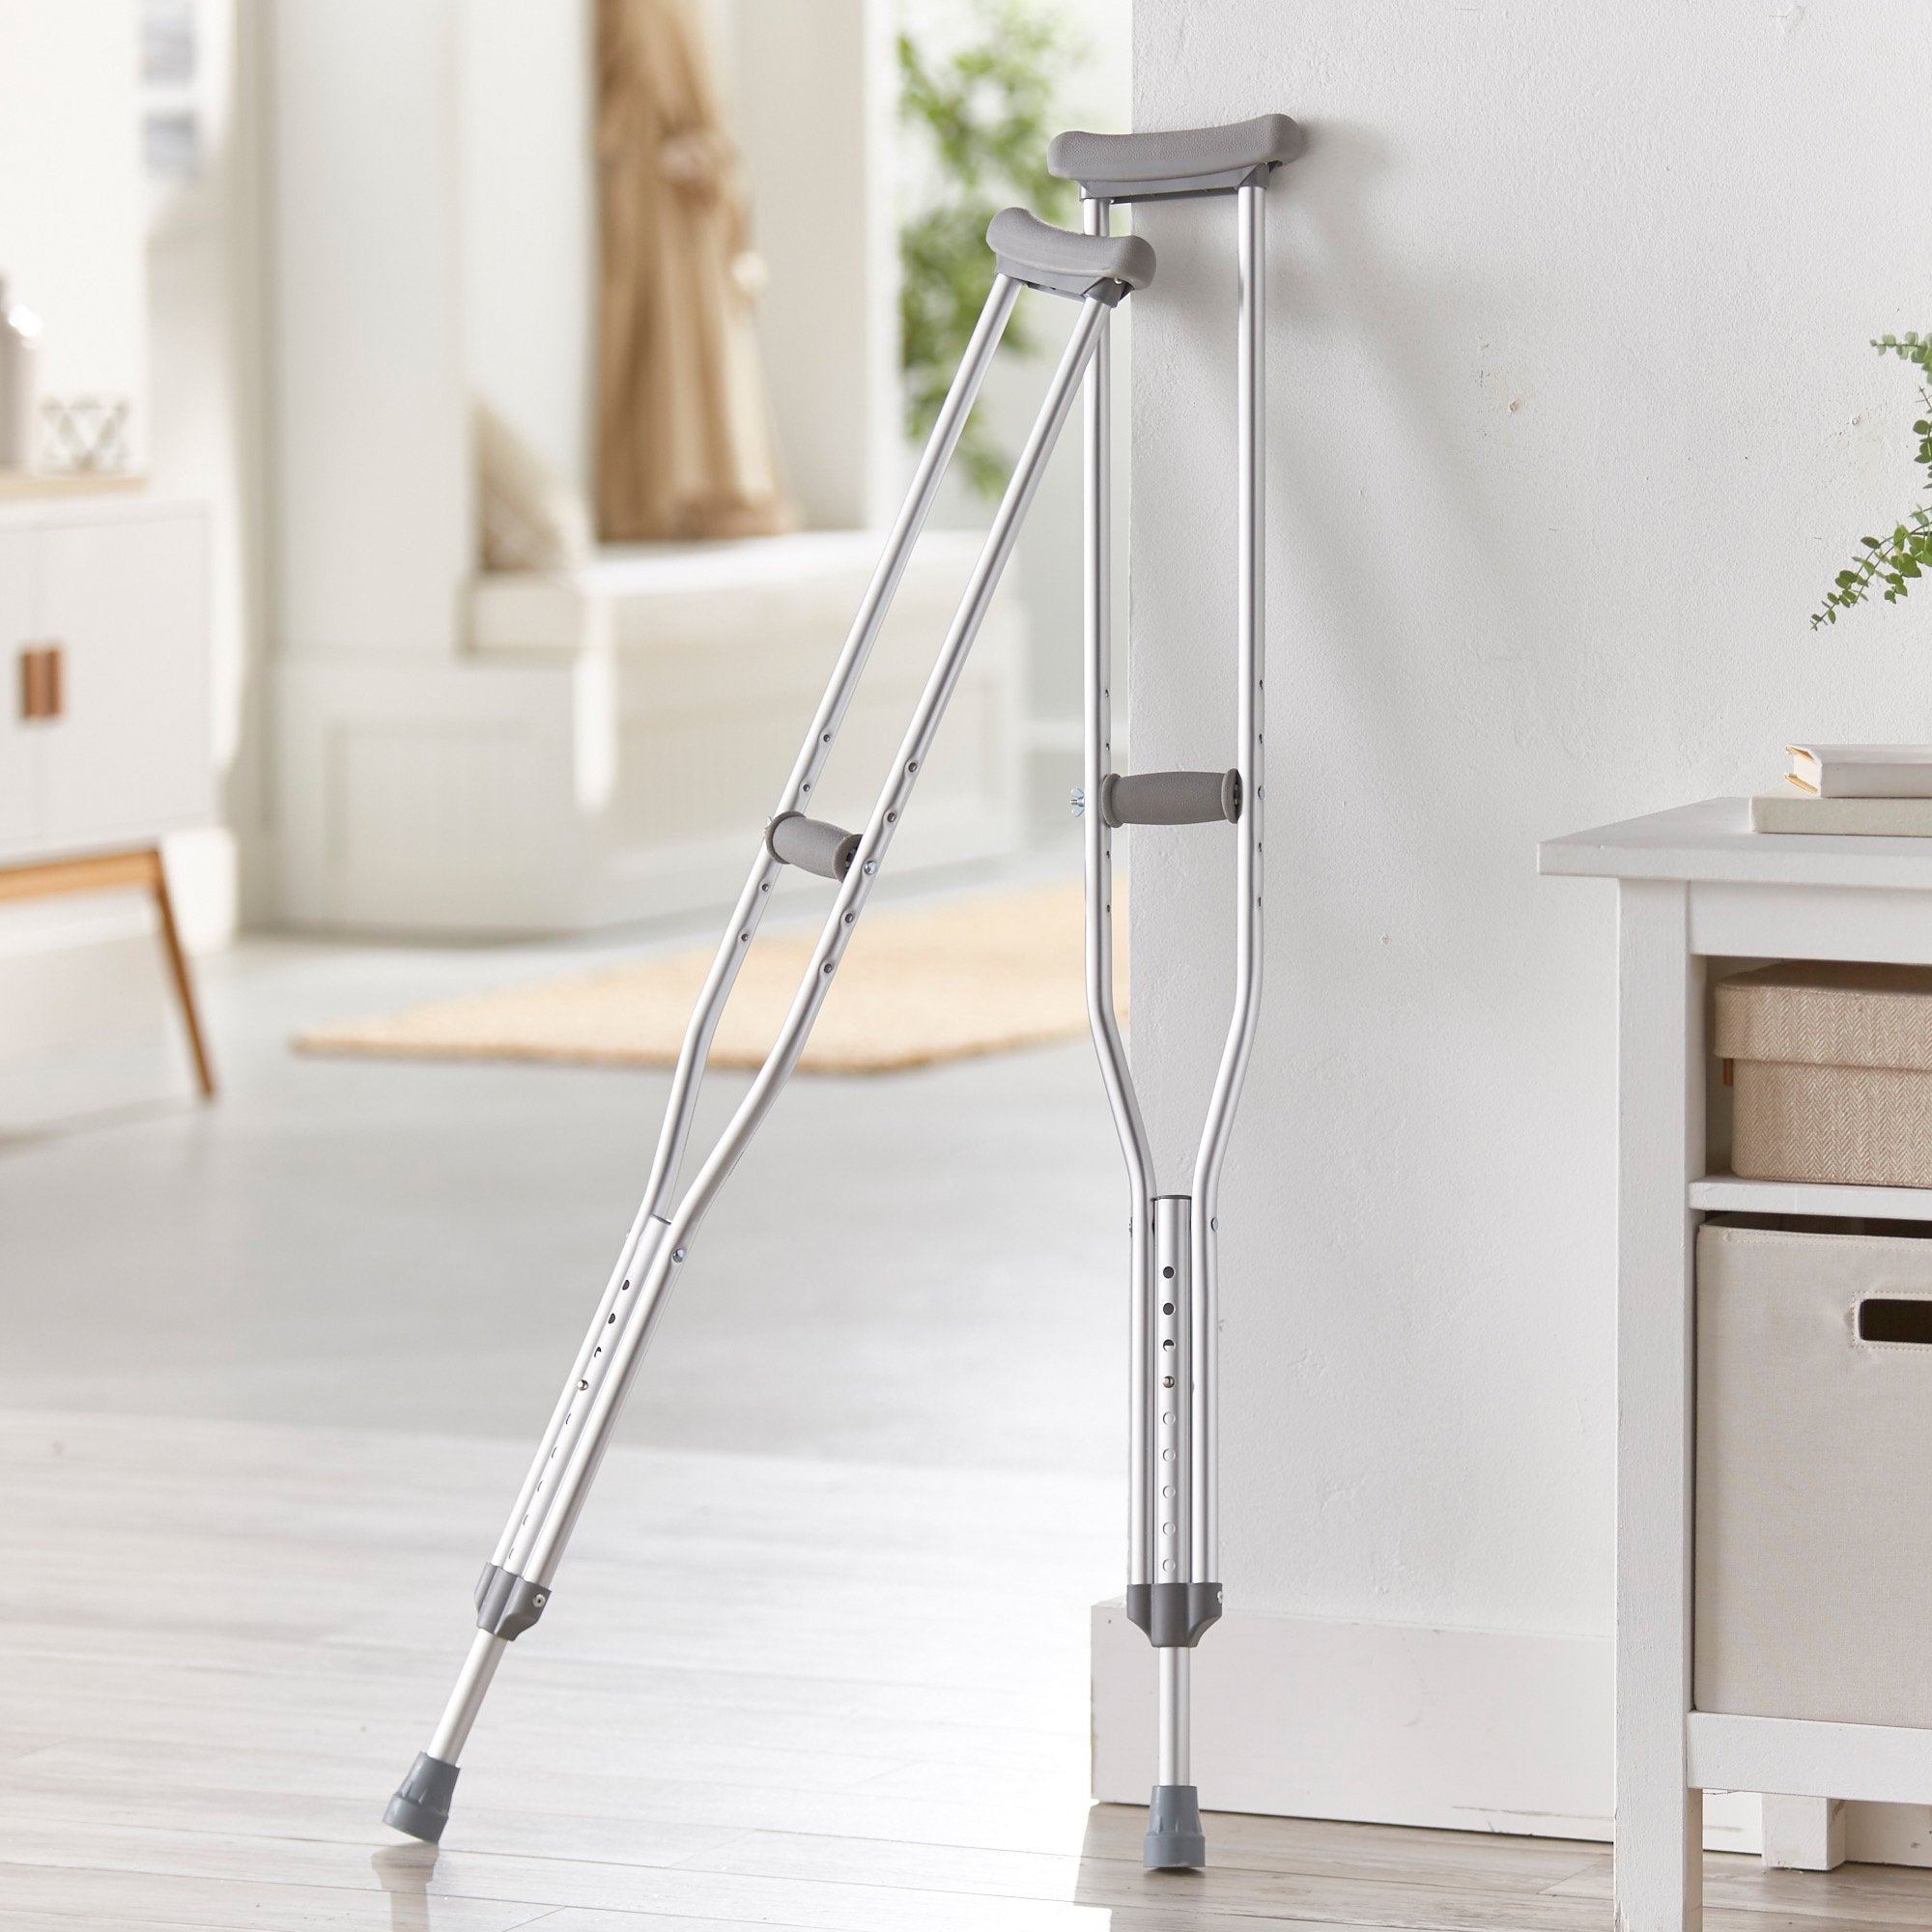 Mobility Aids>Crutches - McKesson - Wasatch Medical Supply